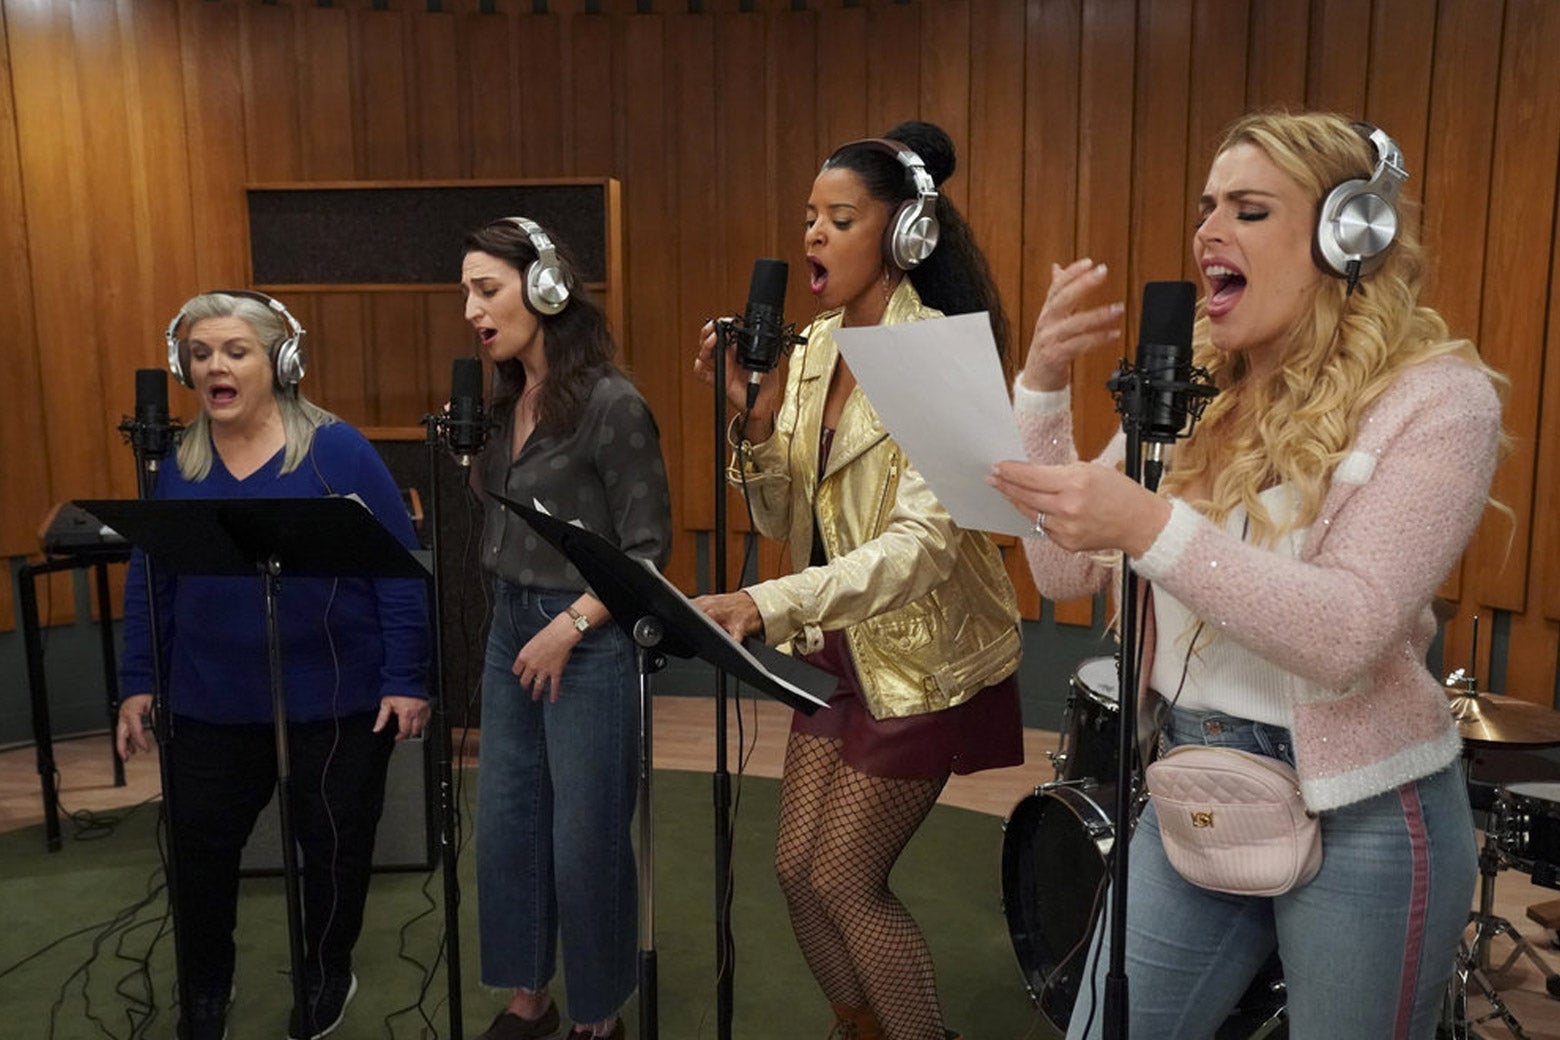 Four women with headphones on sing into microphones in a studio.